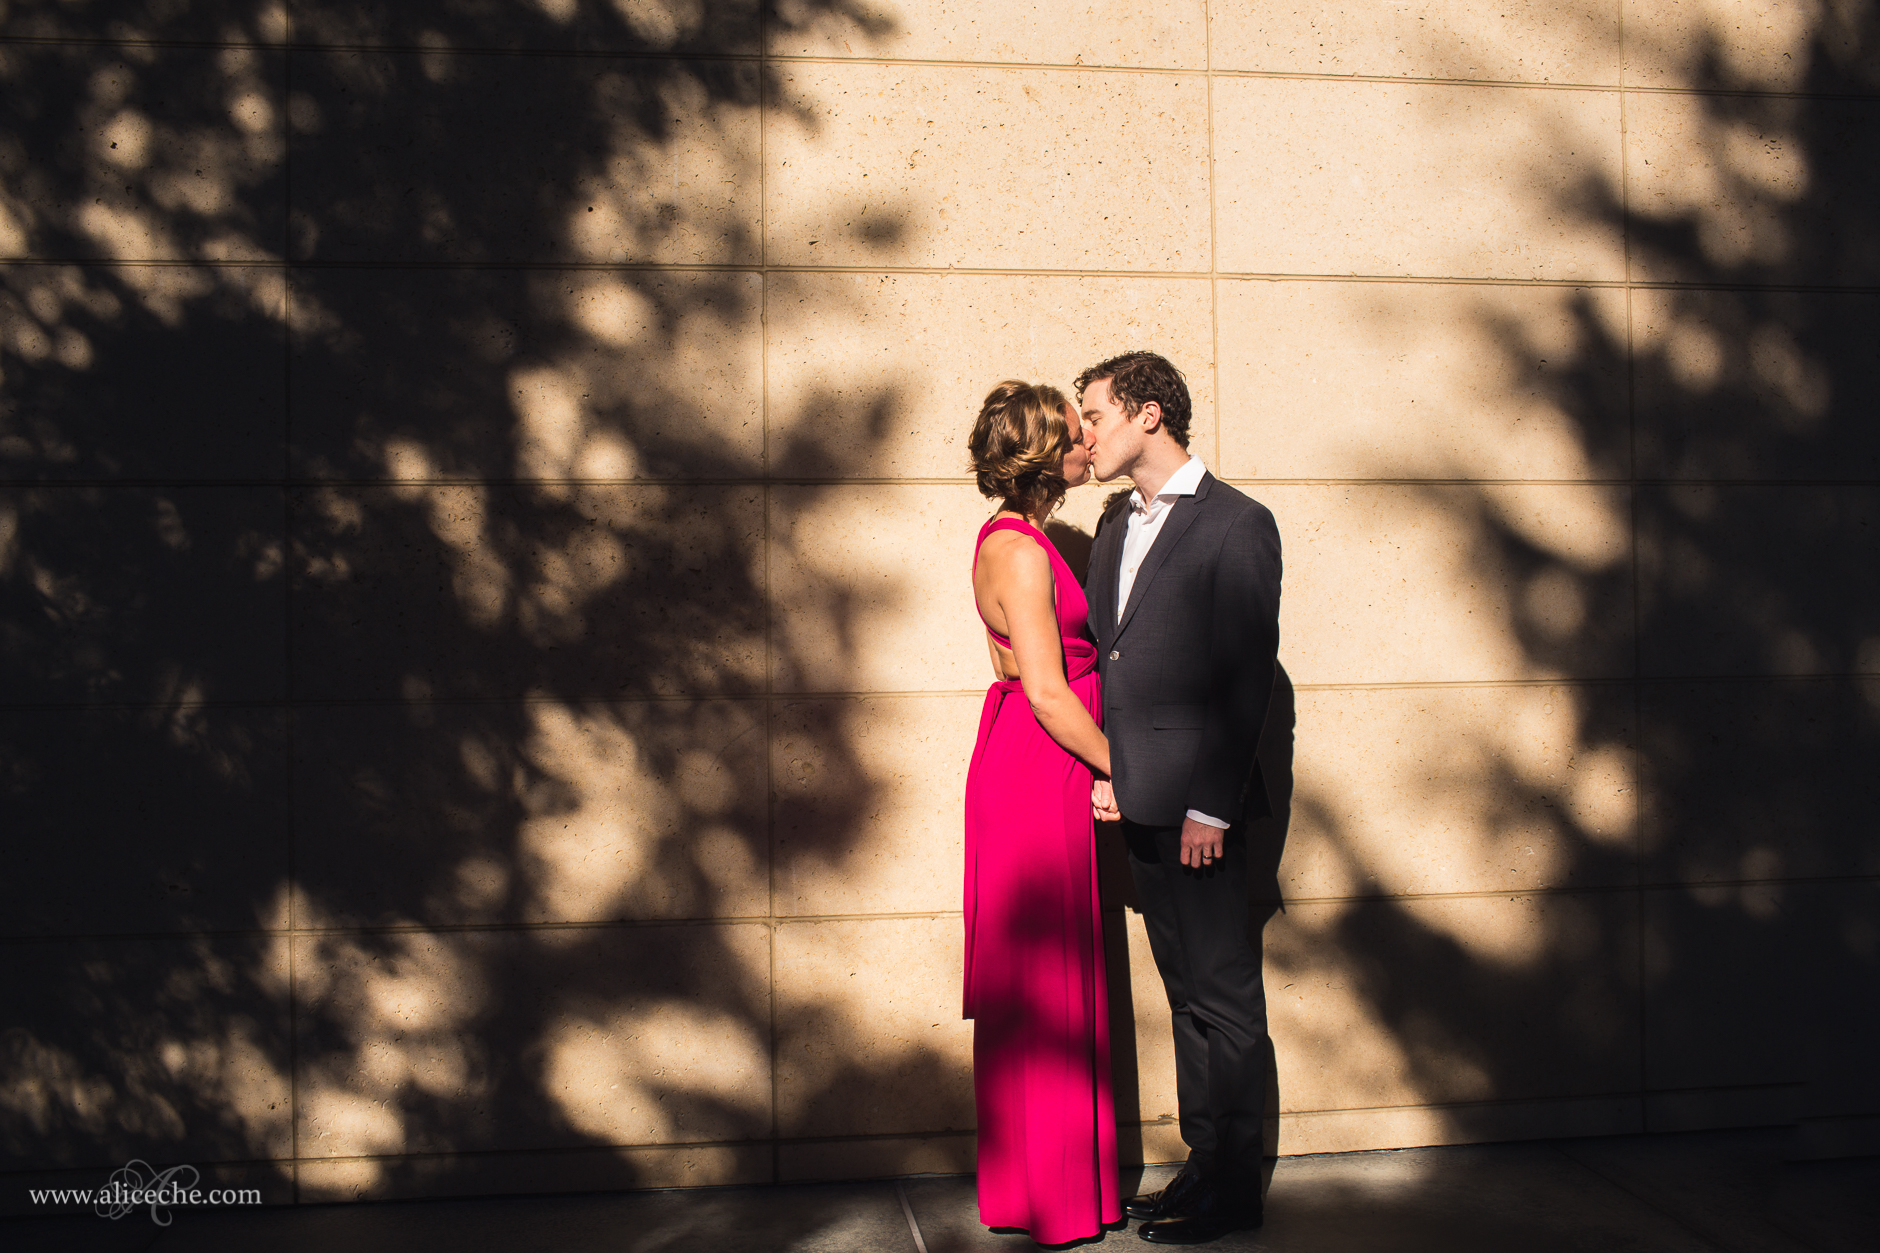 alice-che-photography-palo-alto-anniversary-session-couple-framed-by-tree-shadows-fancy-dress